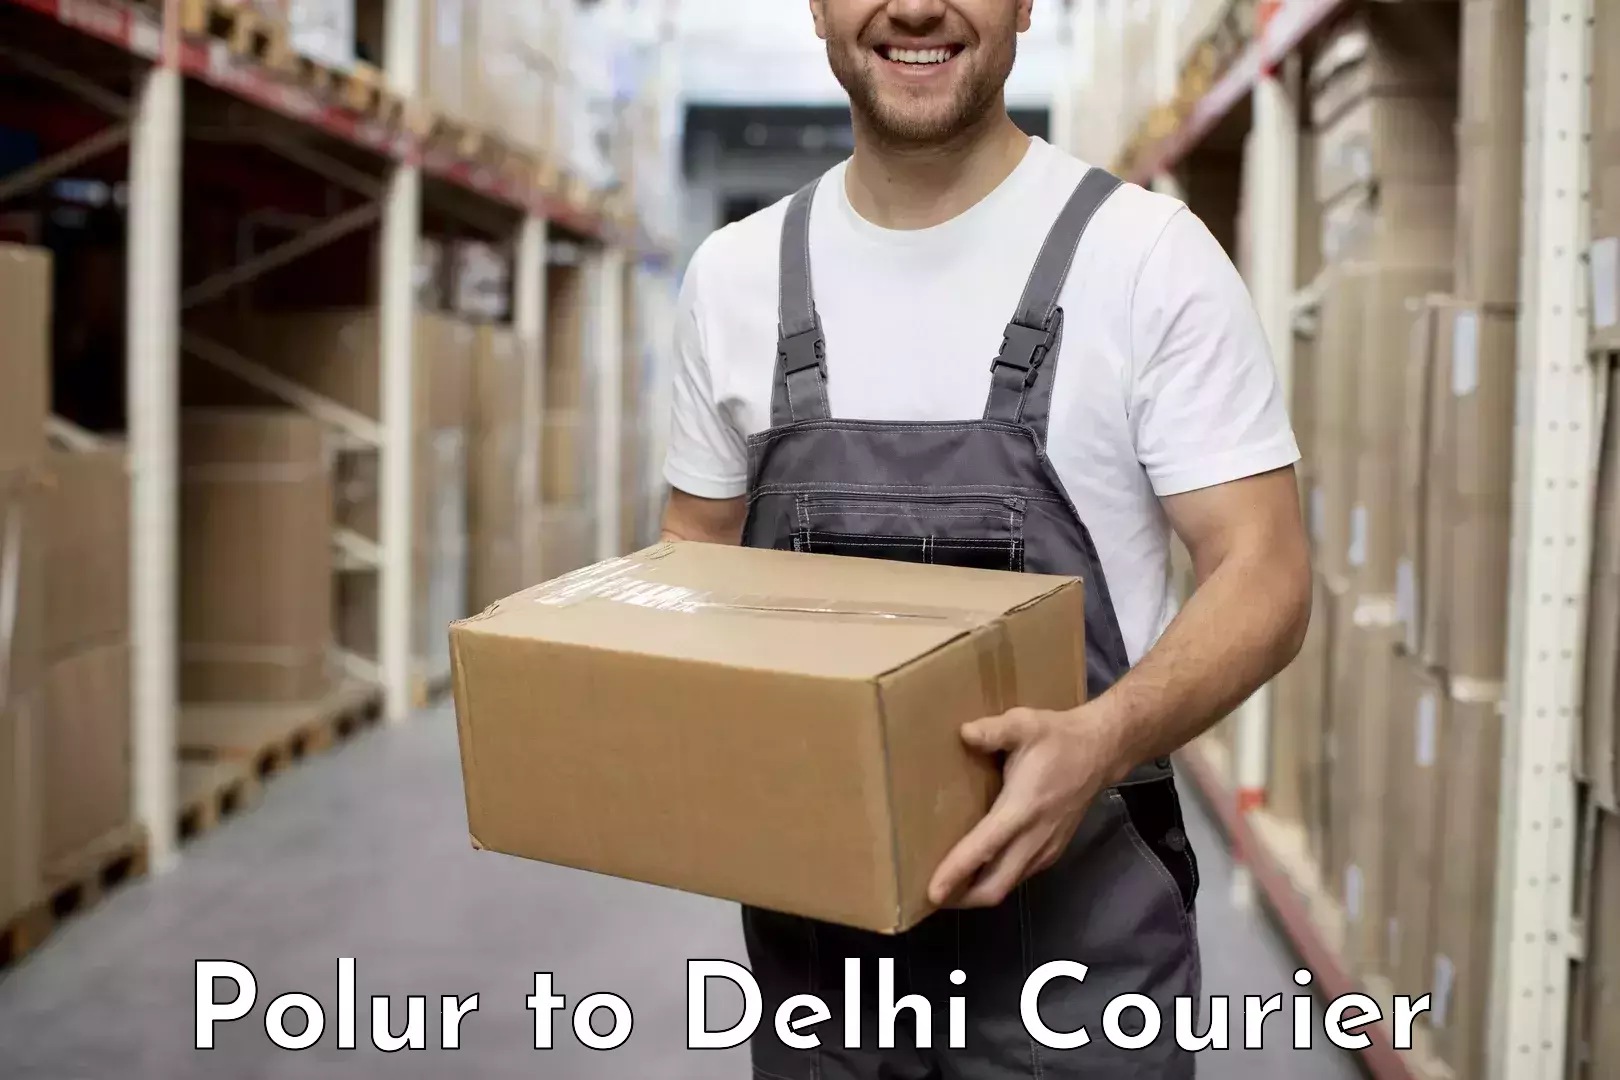 Small business couriers Polur to University of Delhi